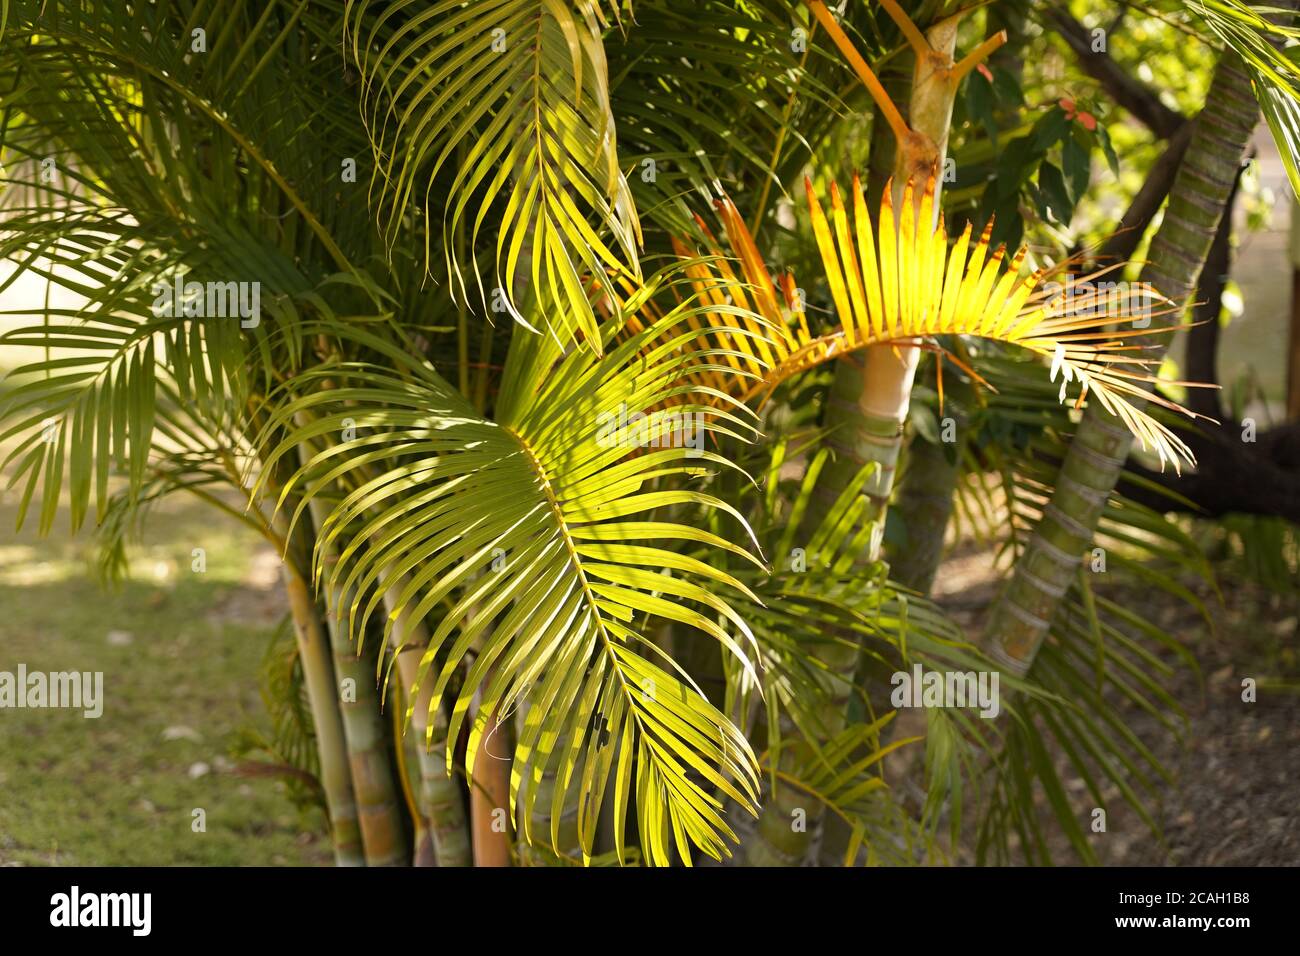 Majestic Palms catching the sun displaying their elegant form Stock Photo